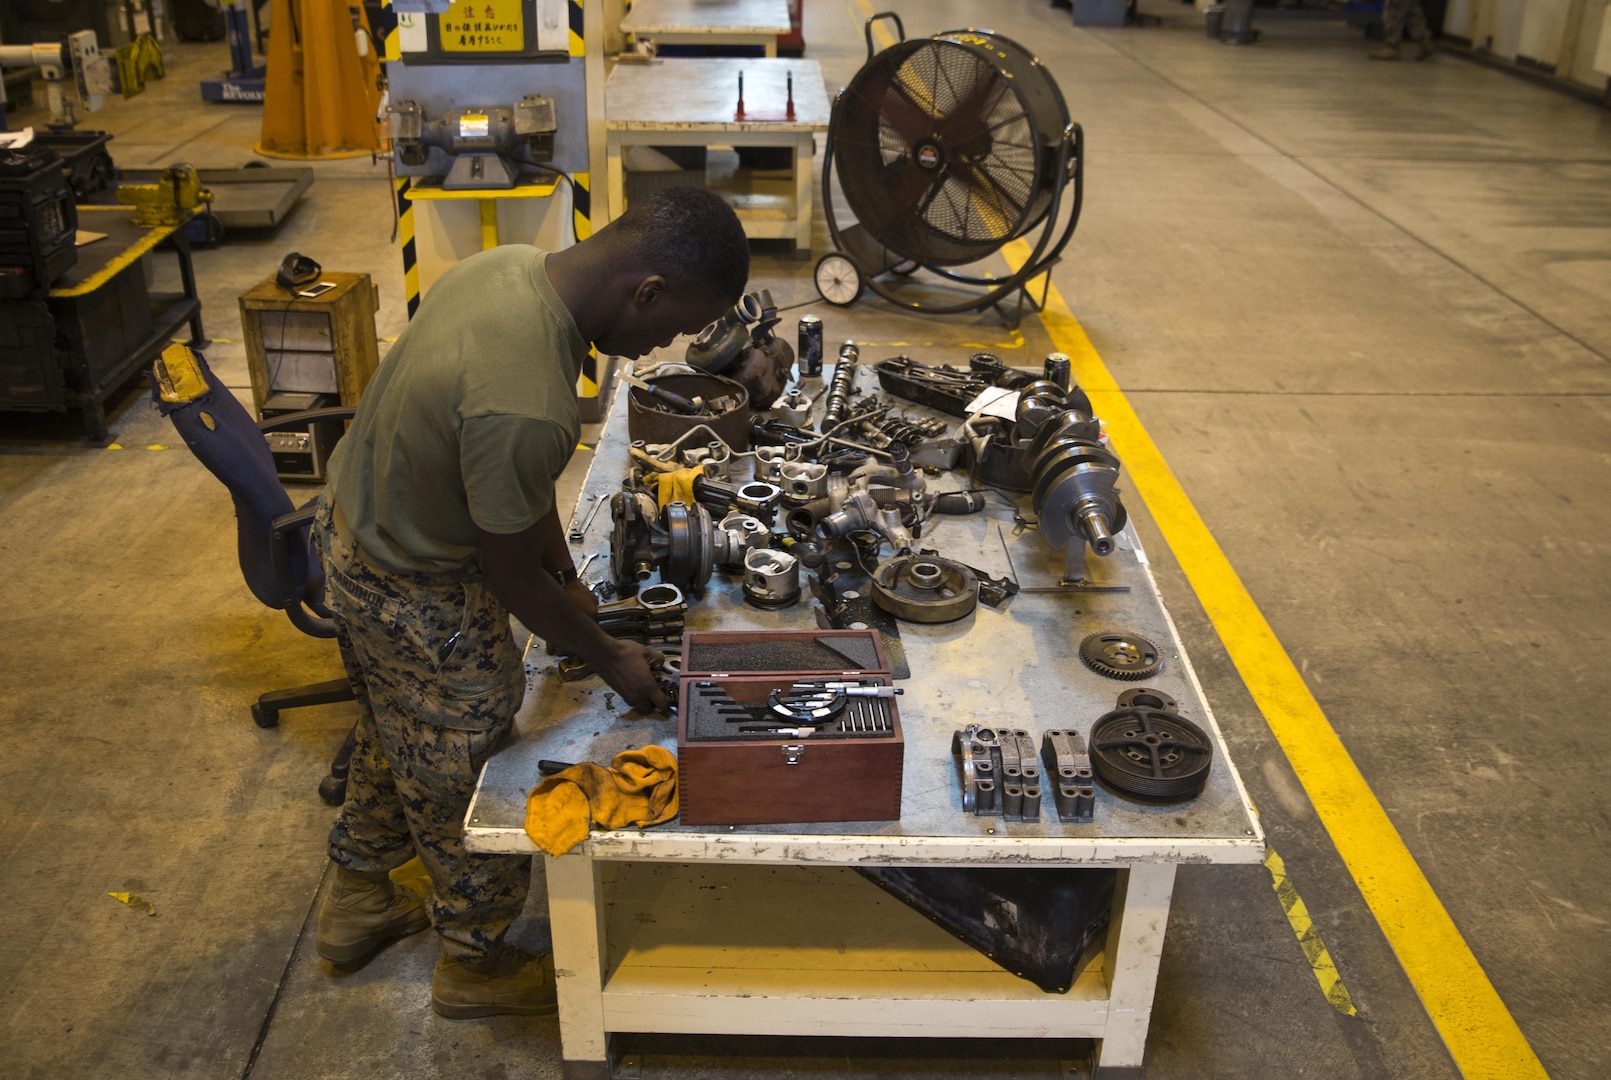 Marine Corps Cpl. Marcus Hardimon cleans a gasket on a valve cover, Nov. 8, 2016, at Camp Kinser, Okinawa, Japan. Marines took apart, cleaned, and assembled an engine of a High Mobility Multipurpose Wheeled Vehicle. Hardimon is an automotive maintenance technician with 3rd Marine Logistics Group, III Marine Expeditionary Force.